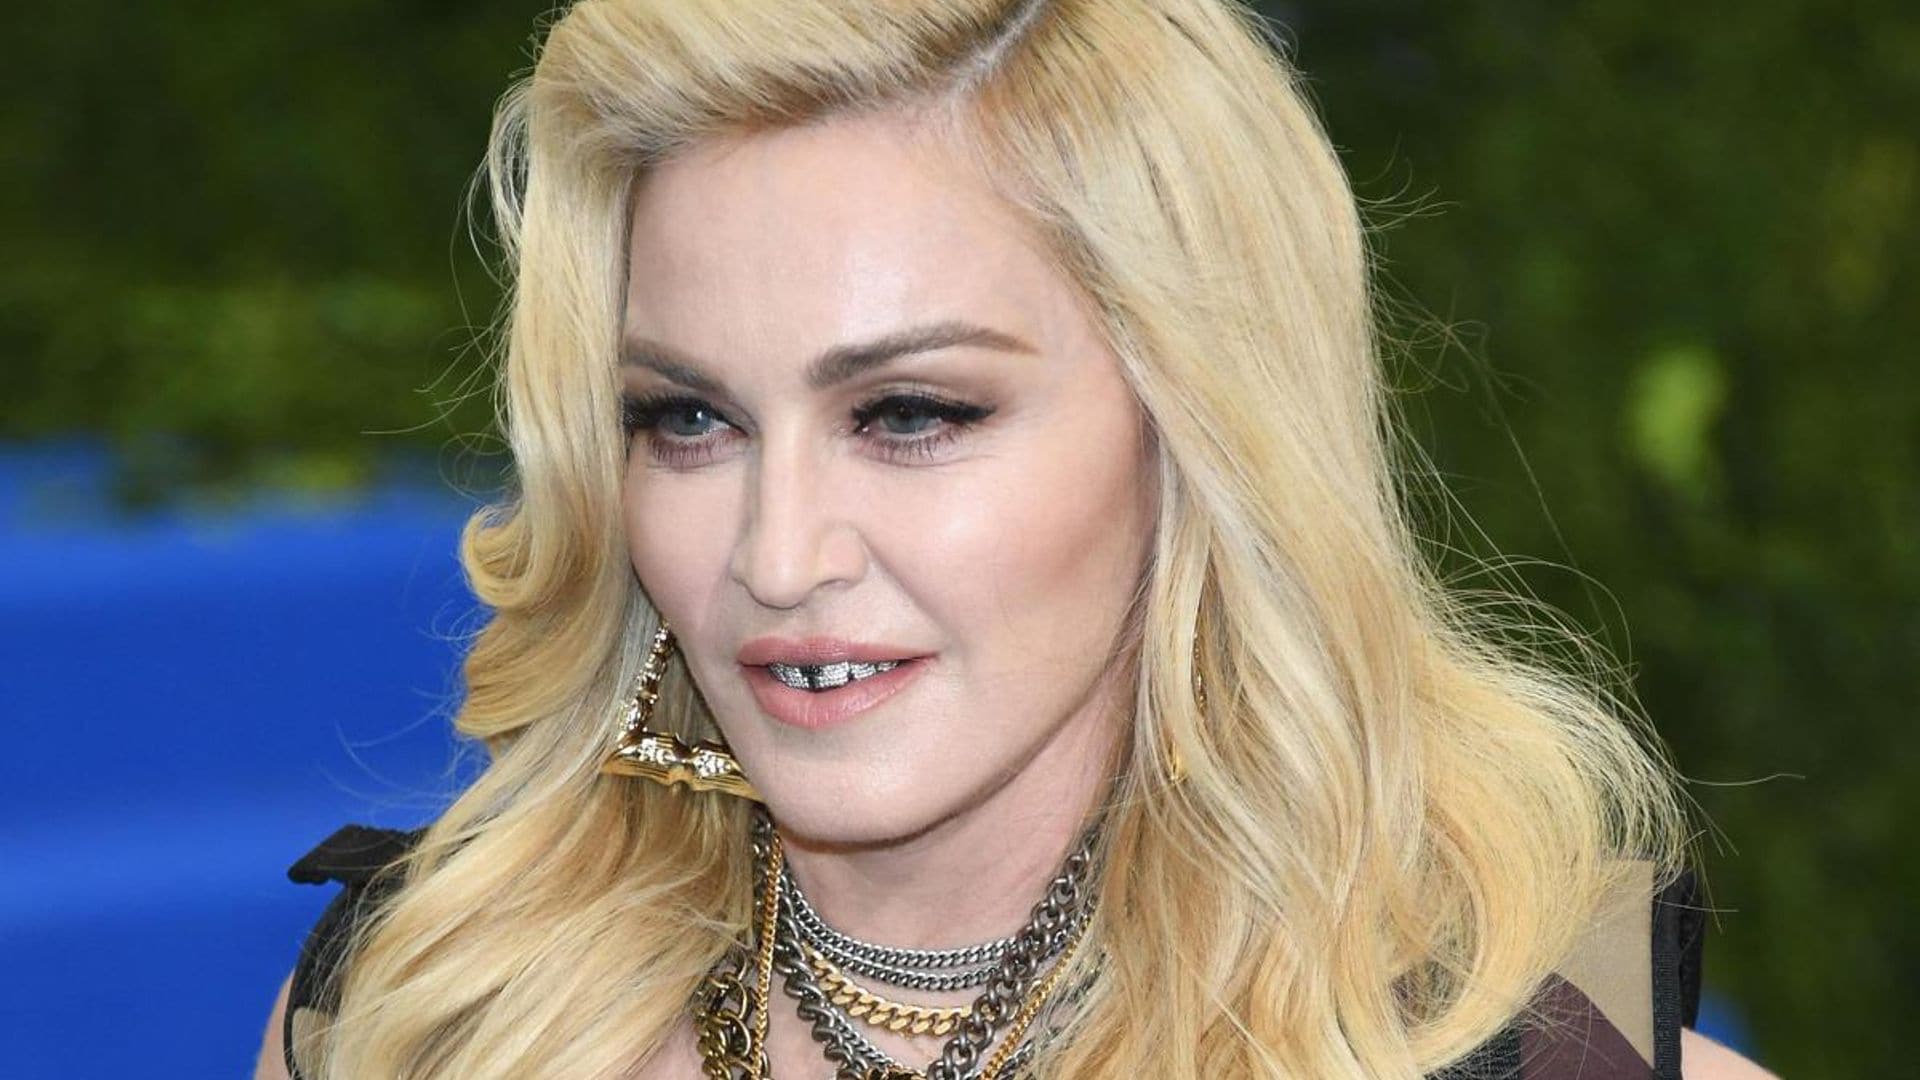 Madonna found unresponsive and rushed to hospital: ‘Still under medical care’